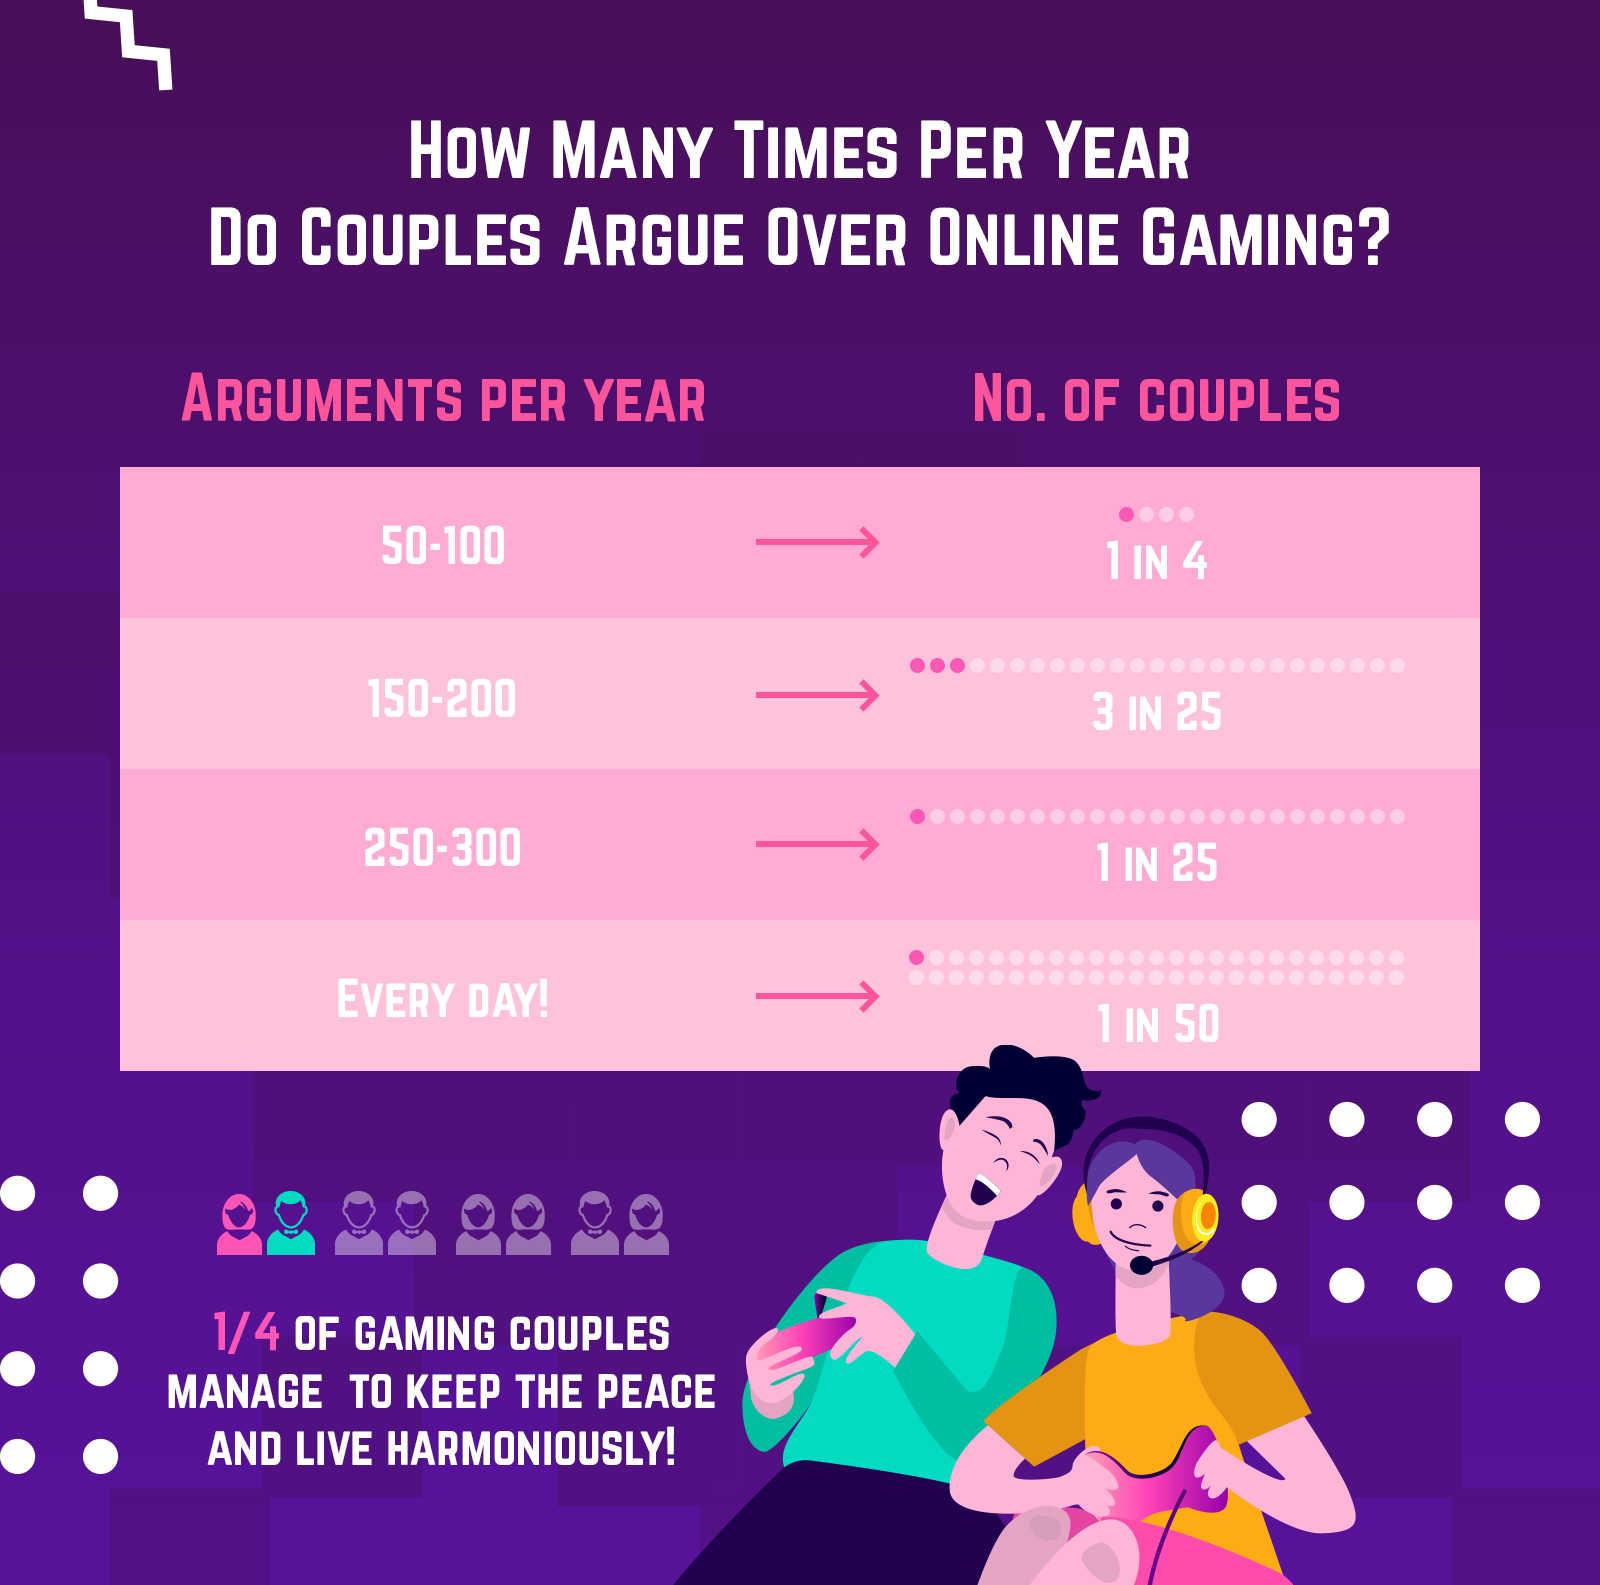 How many times per year do couples argue over online gaming